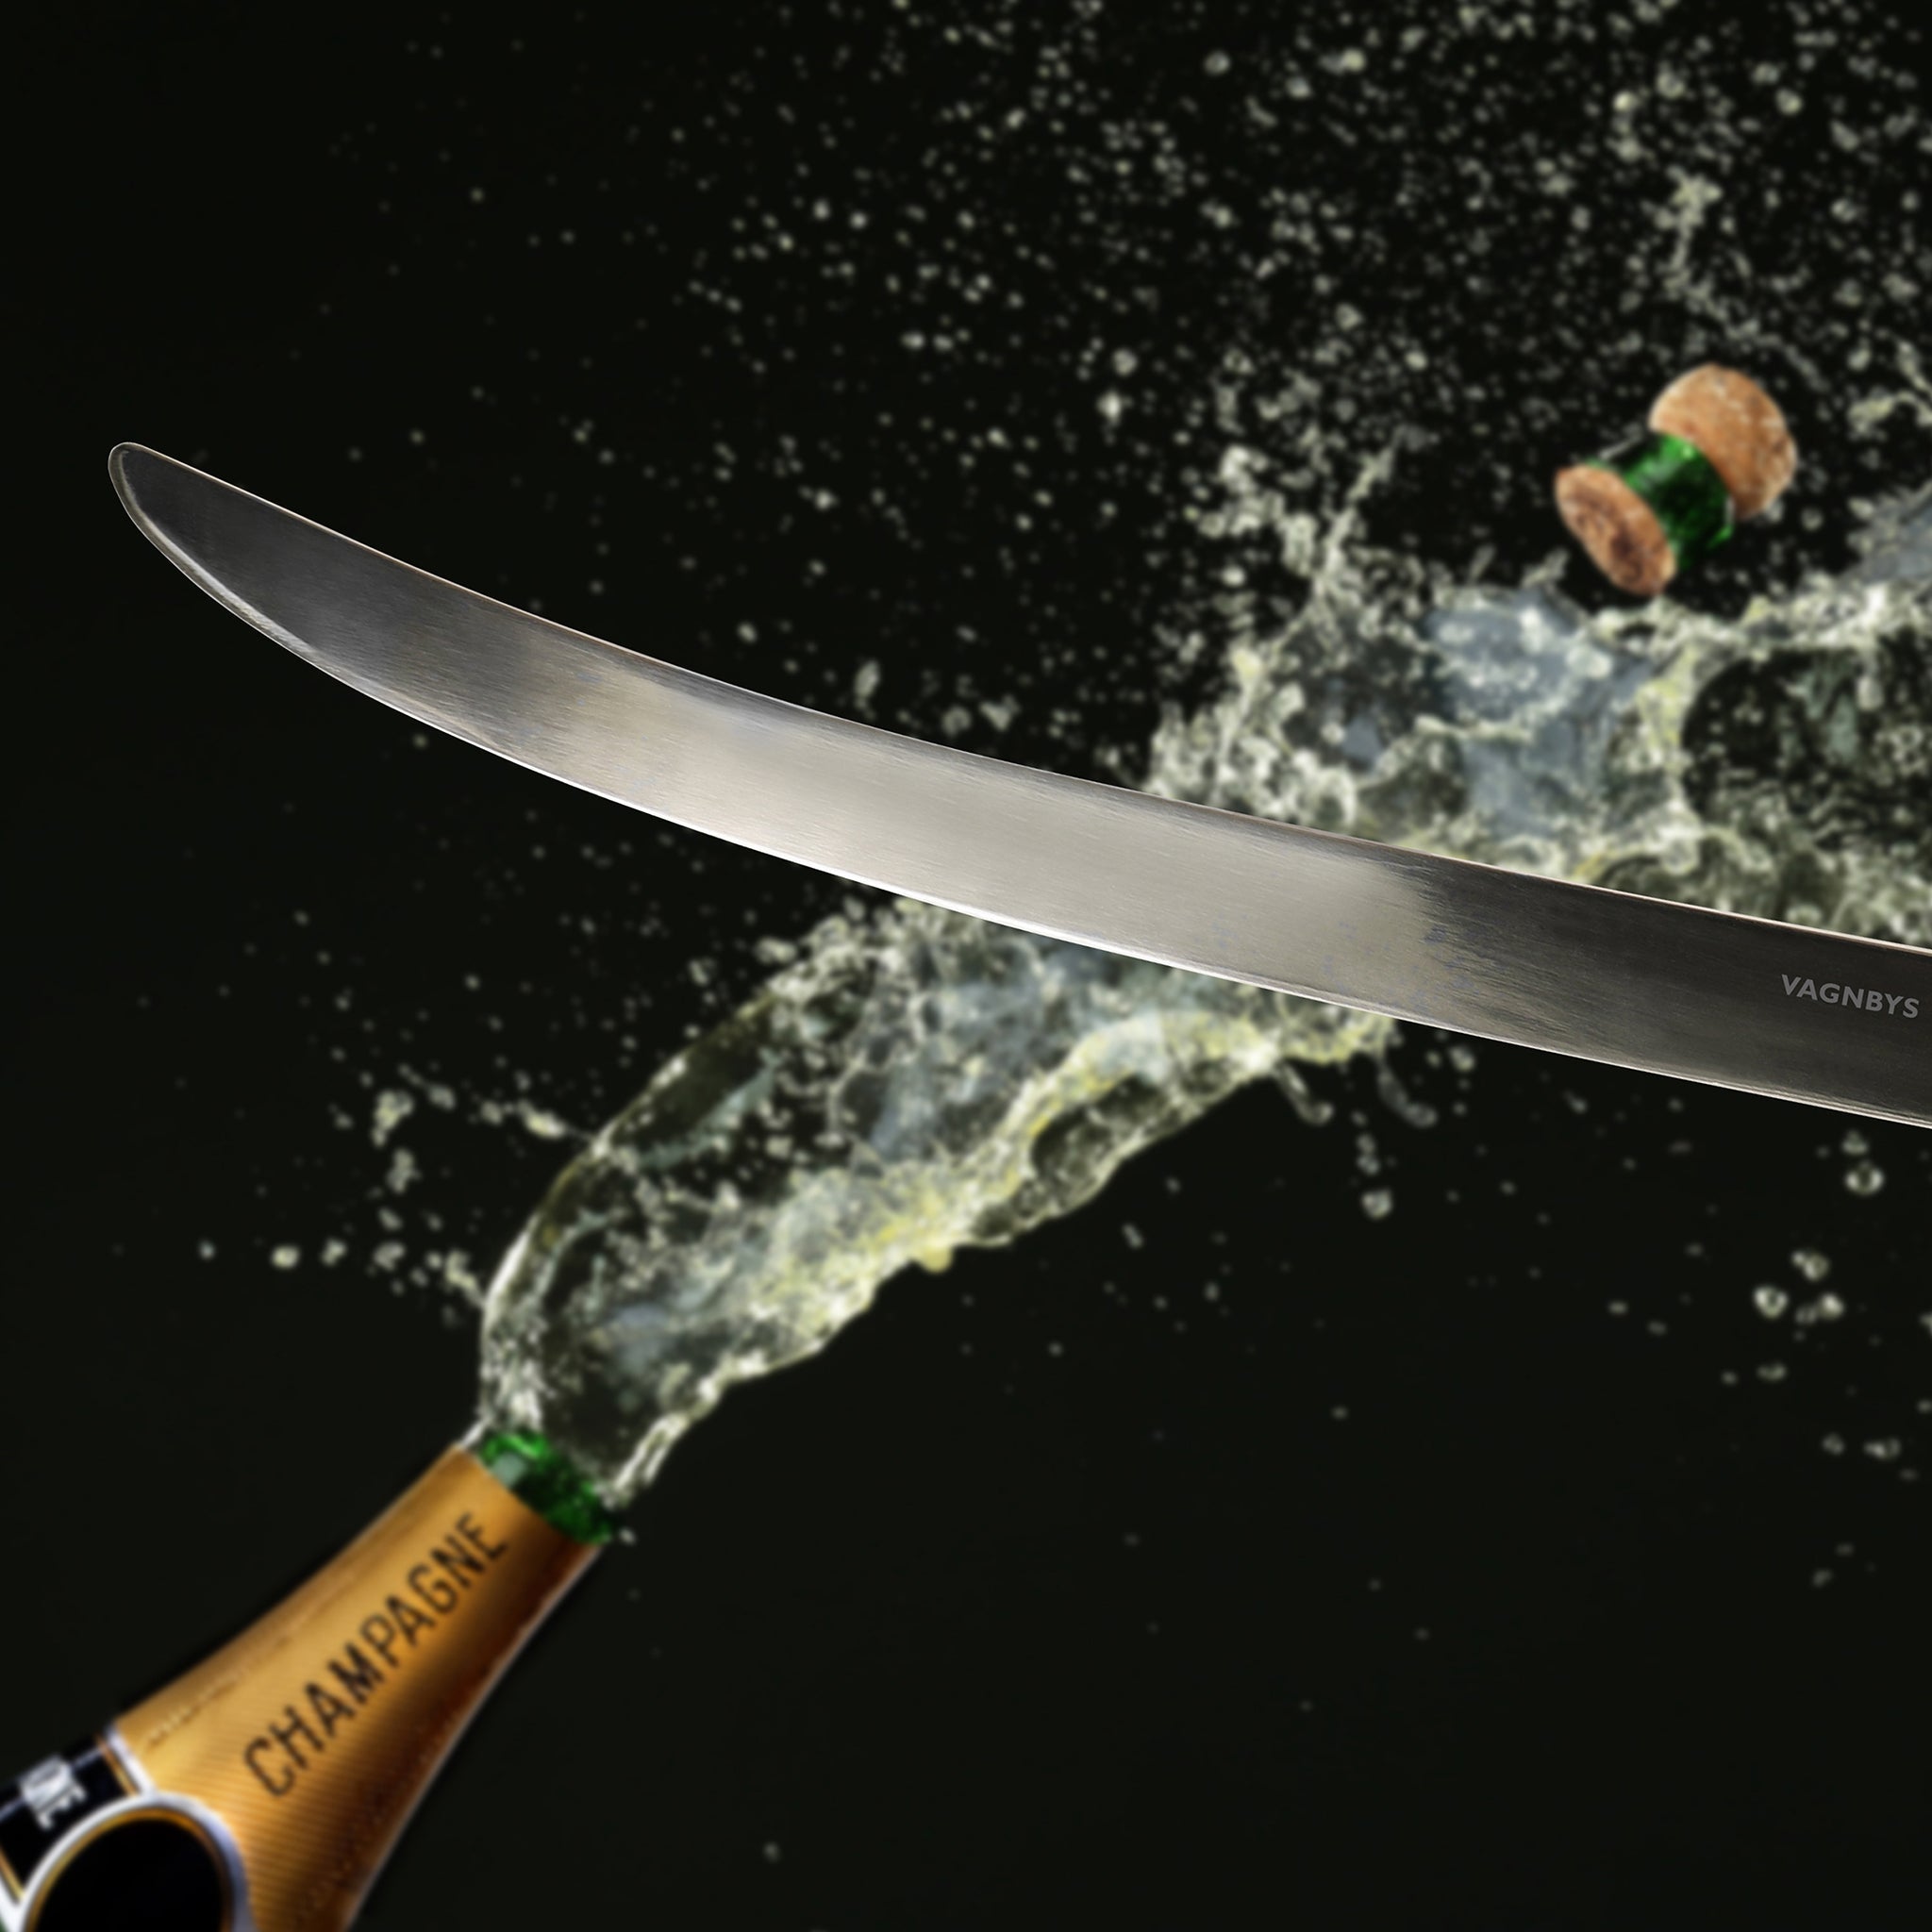 Vagnbys® Champagne Sabre by Ethan+Ashe